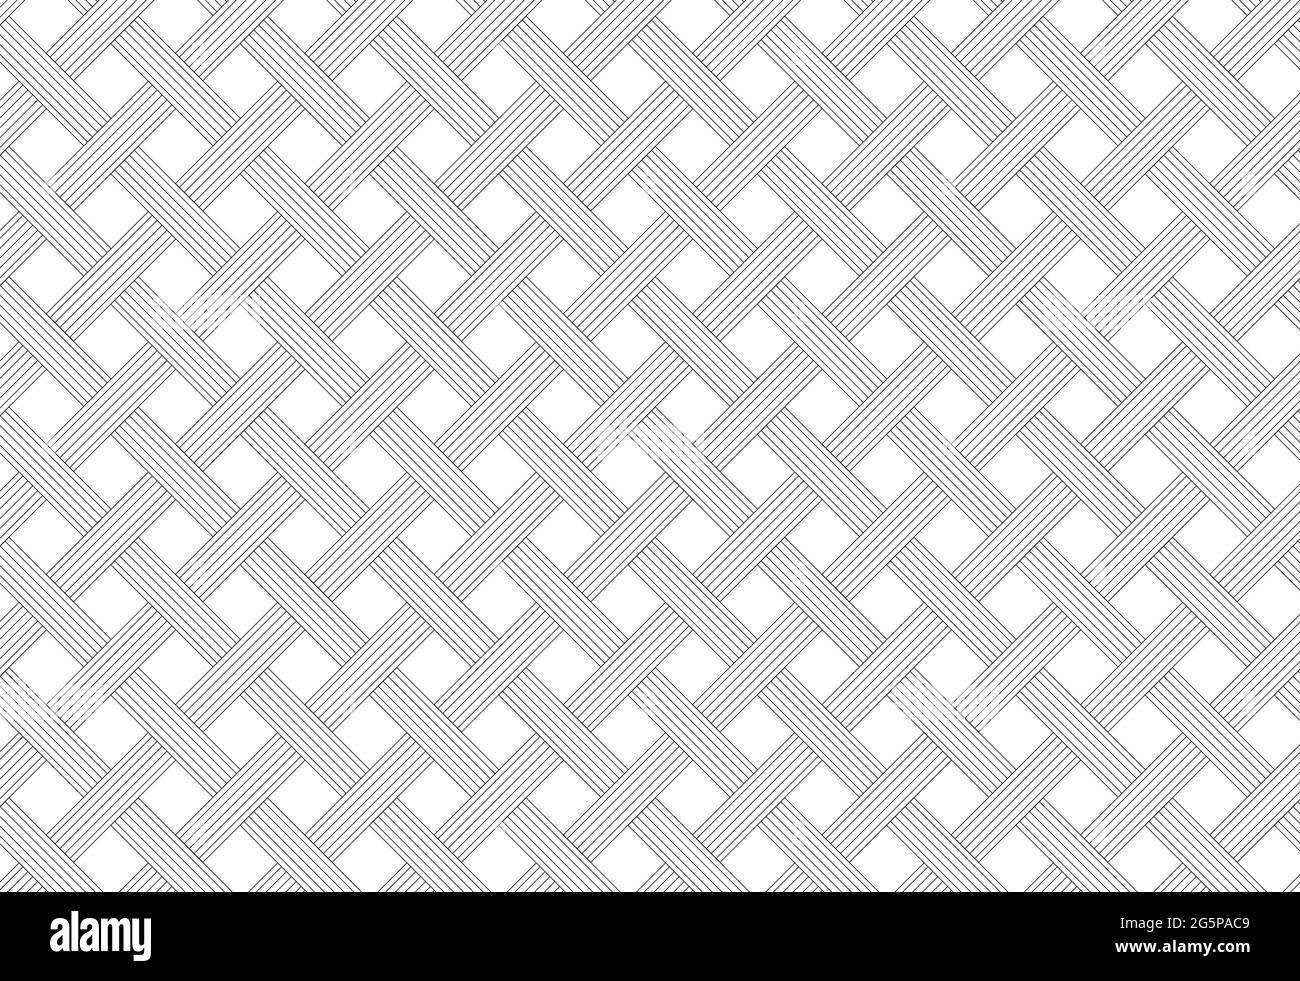 Houndstooth Seamless Repeat in Photoshop — Another Digital Fabric Weave